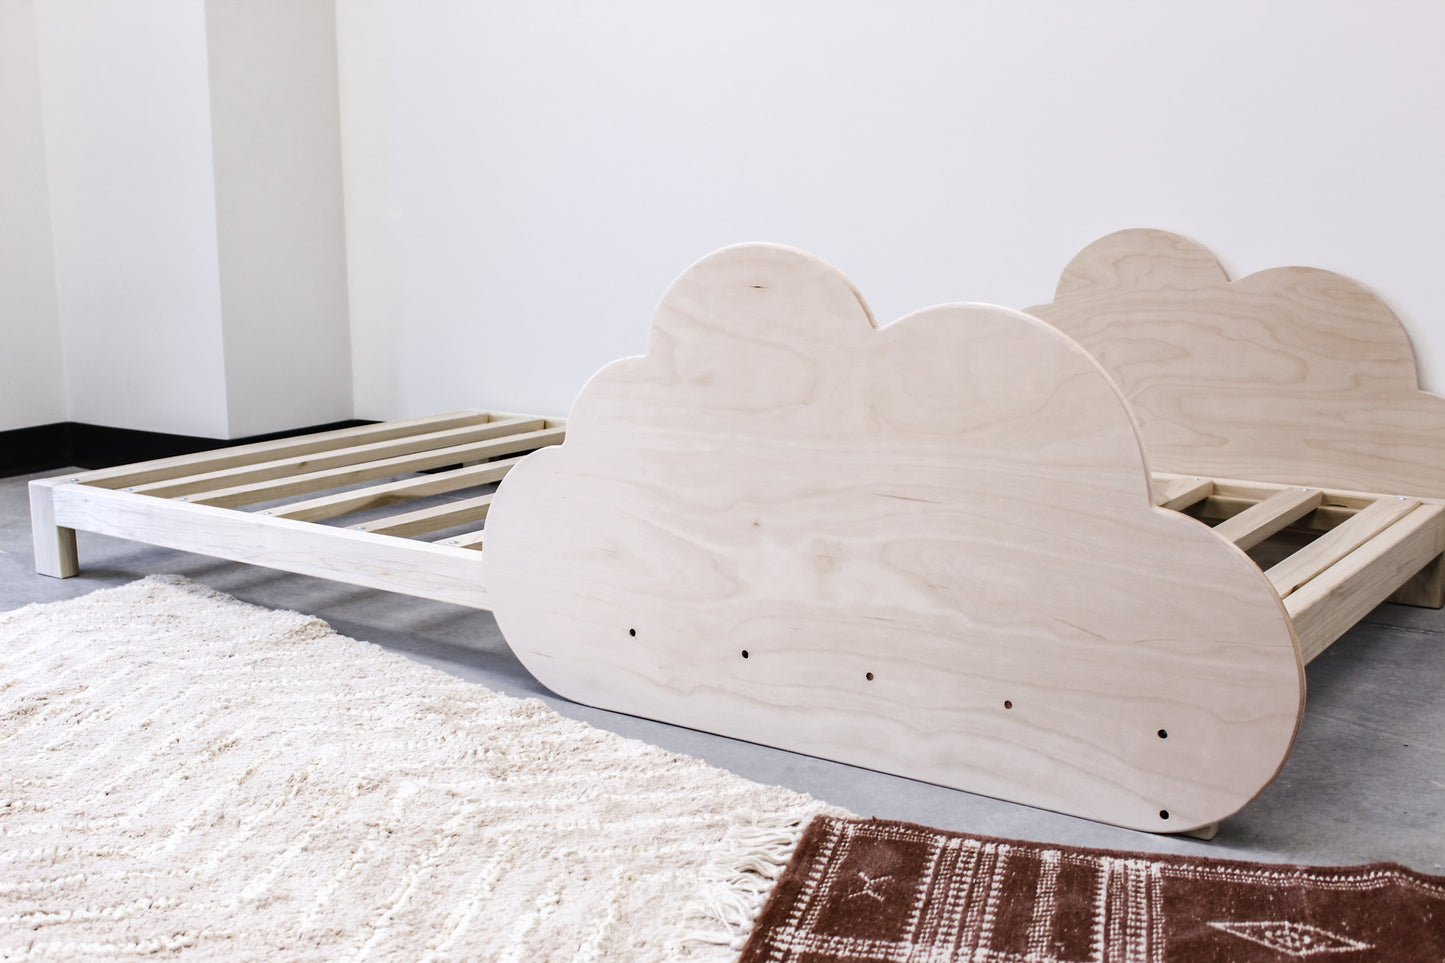 A solid wood platform bed featuring a minimalist design with a sleek, cloud-shaped railing. The bed frame is crafted from sturdy, natural wood with a smooth finish, providing a modern and elegant sleeping space.